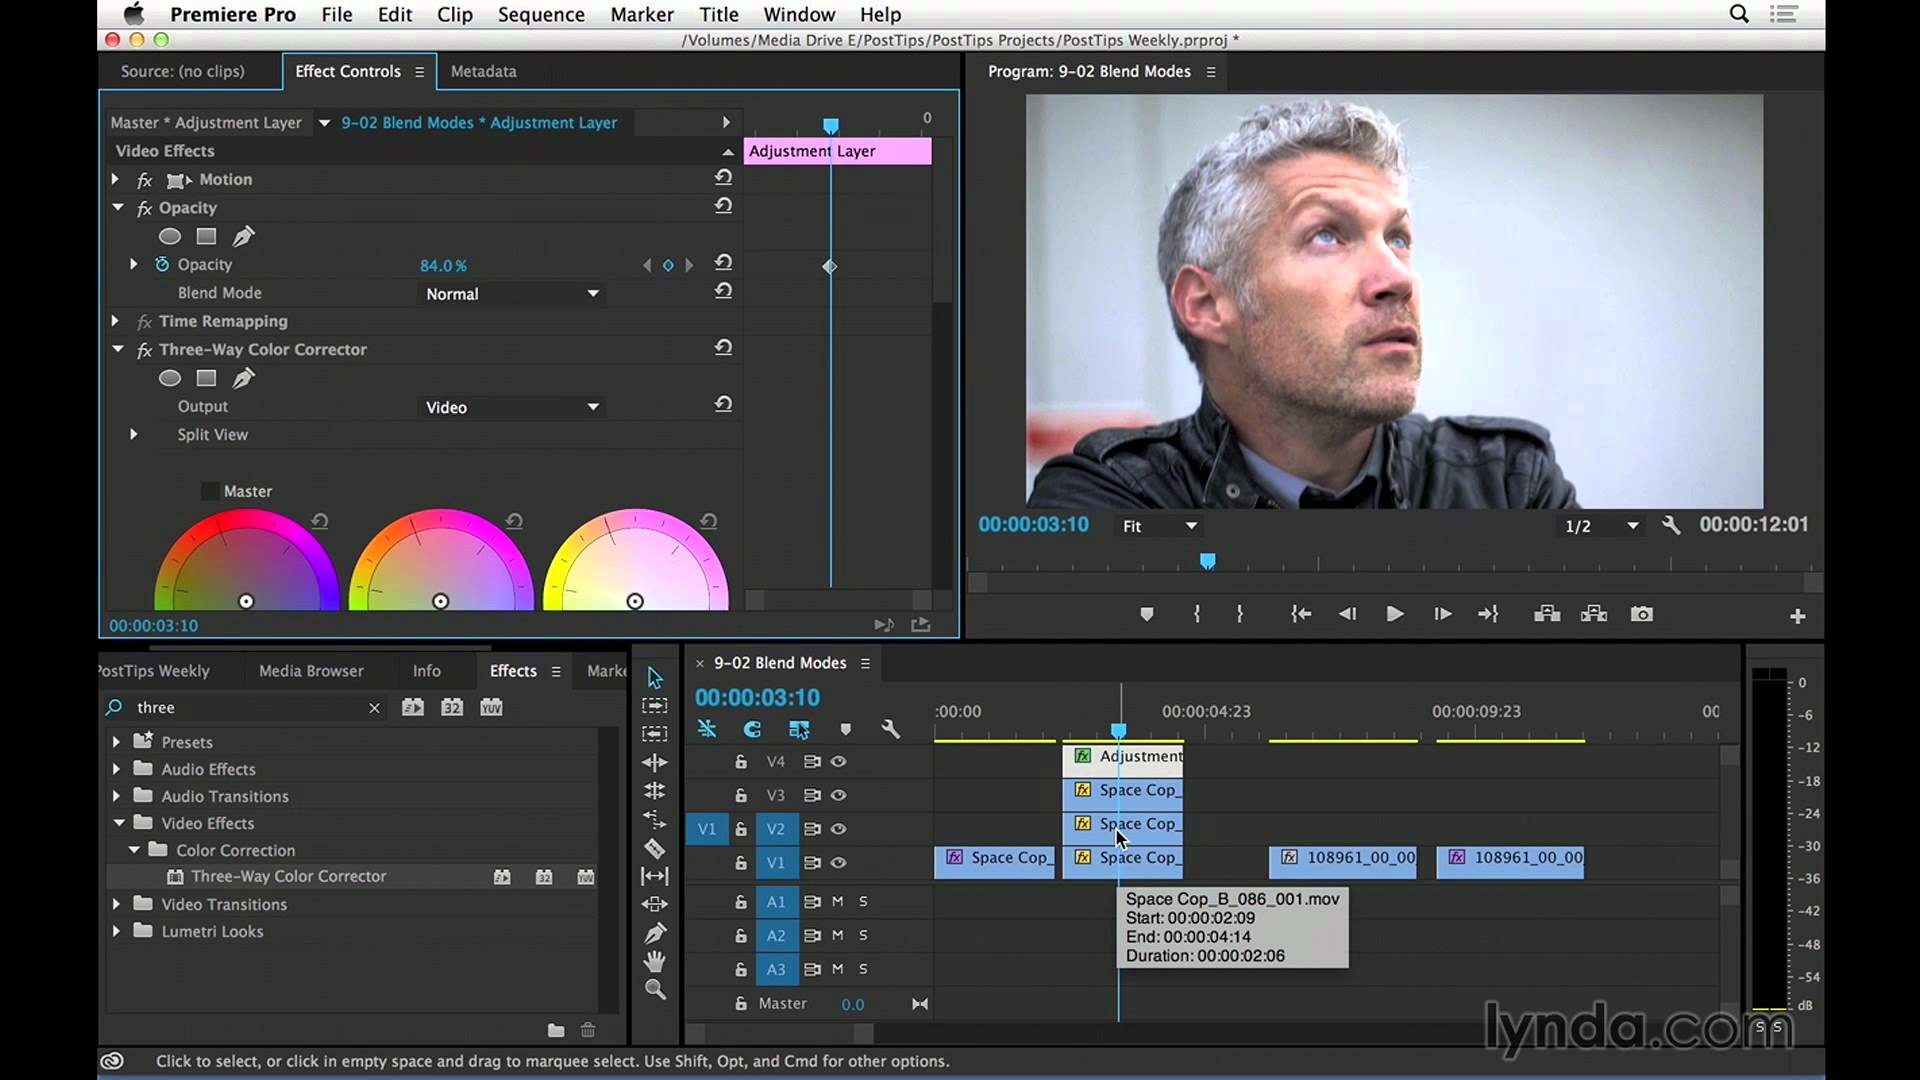 Use Blend Modes in Adobe Premiere to Fix Exposure Issues